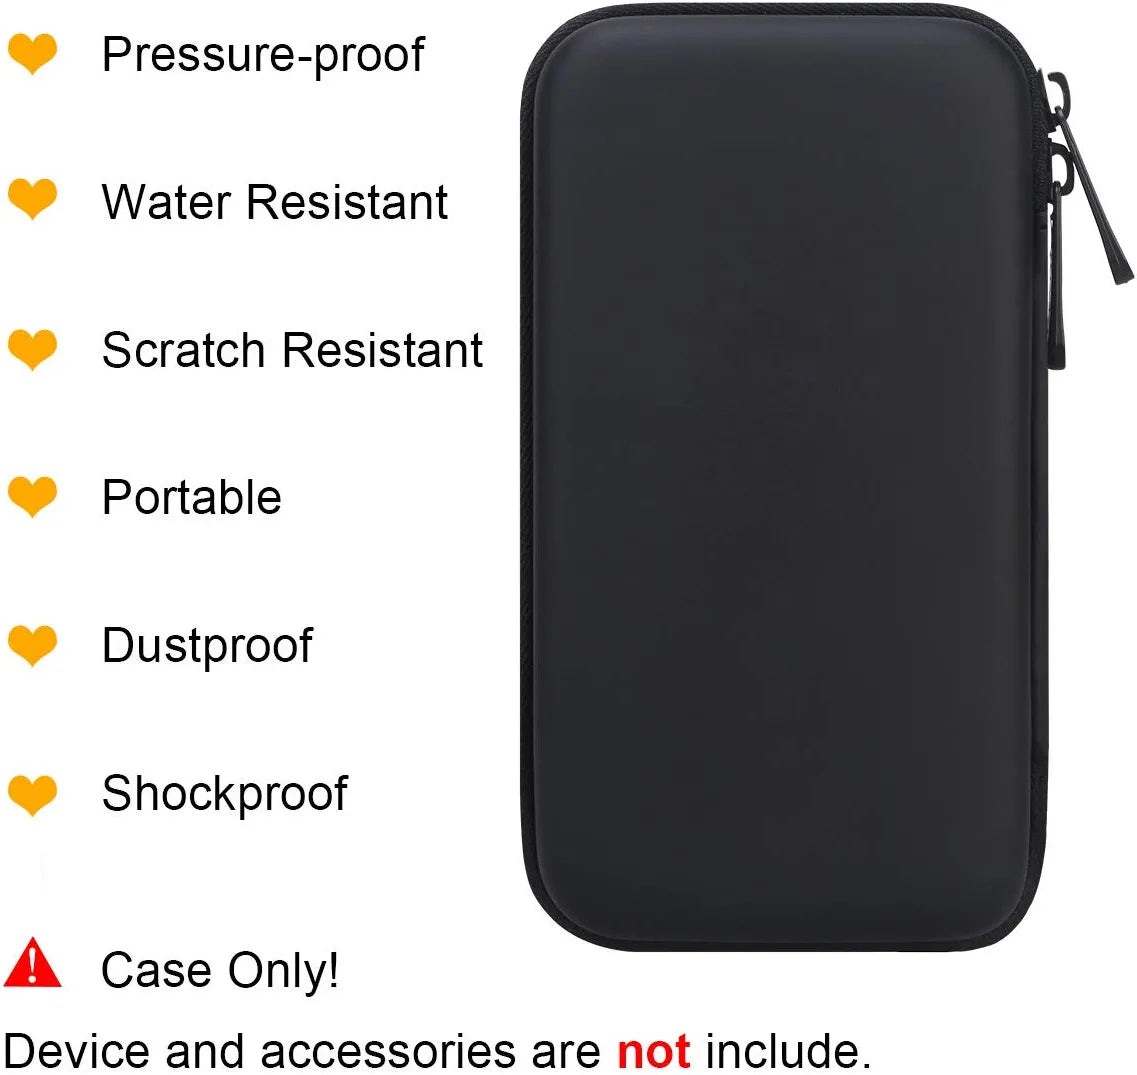 Carrying Case Hard Protective Case Impact Resistant Travel Power Bank Pouch Bag USB Cable Organizer for Earbuds, Cable Cords, Charger Adapter, Electronic Accessories Case Wallet, Black